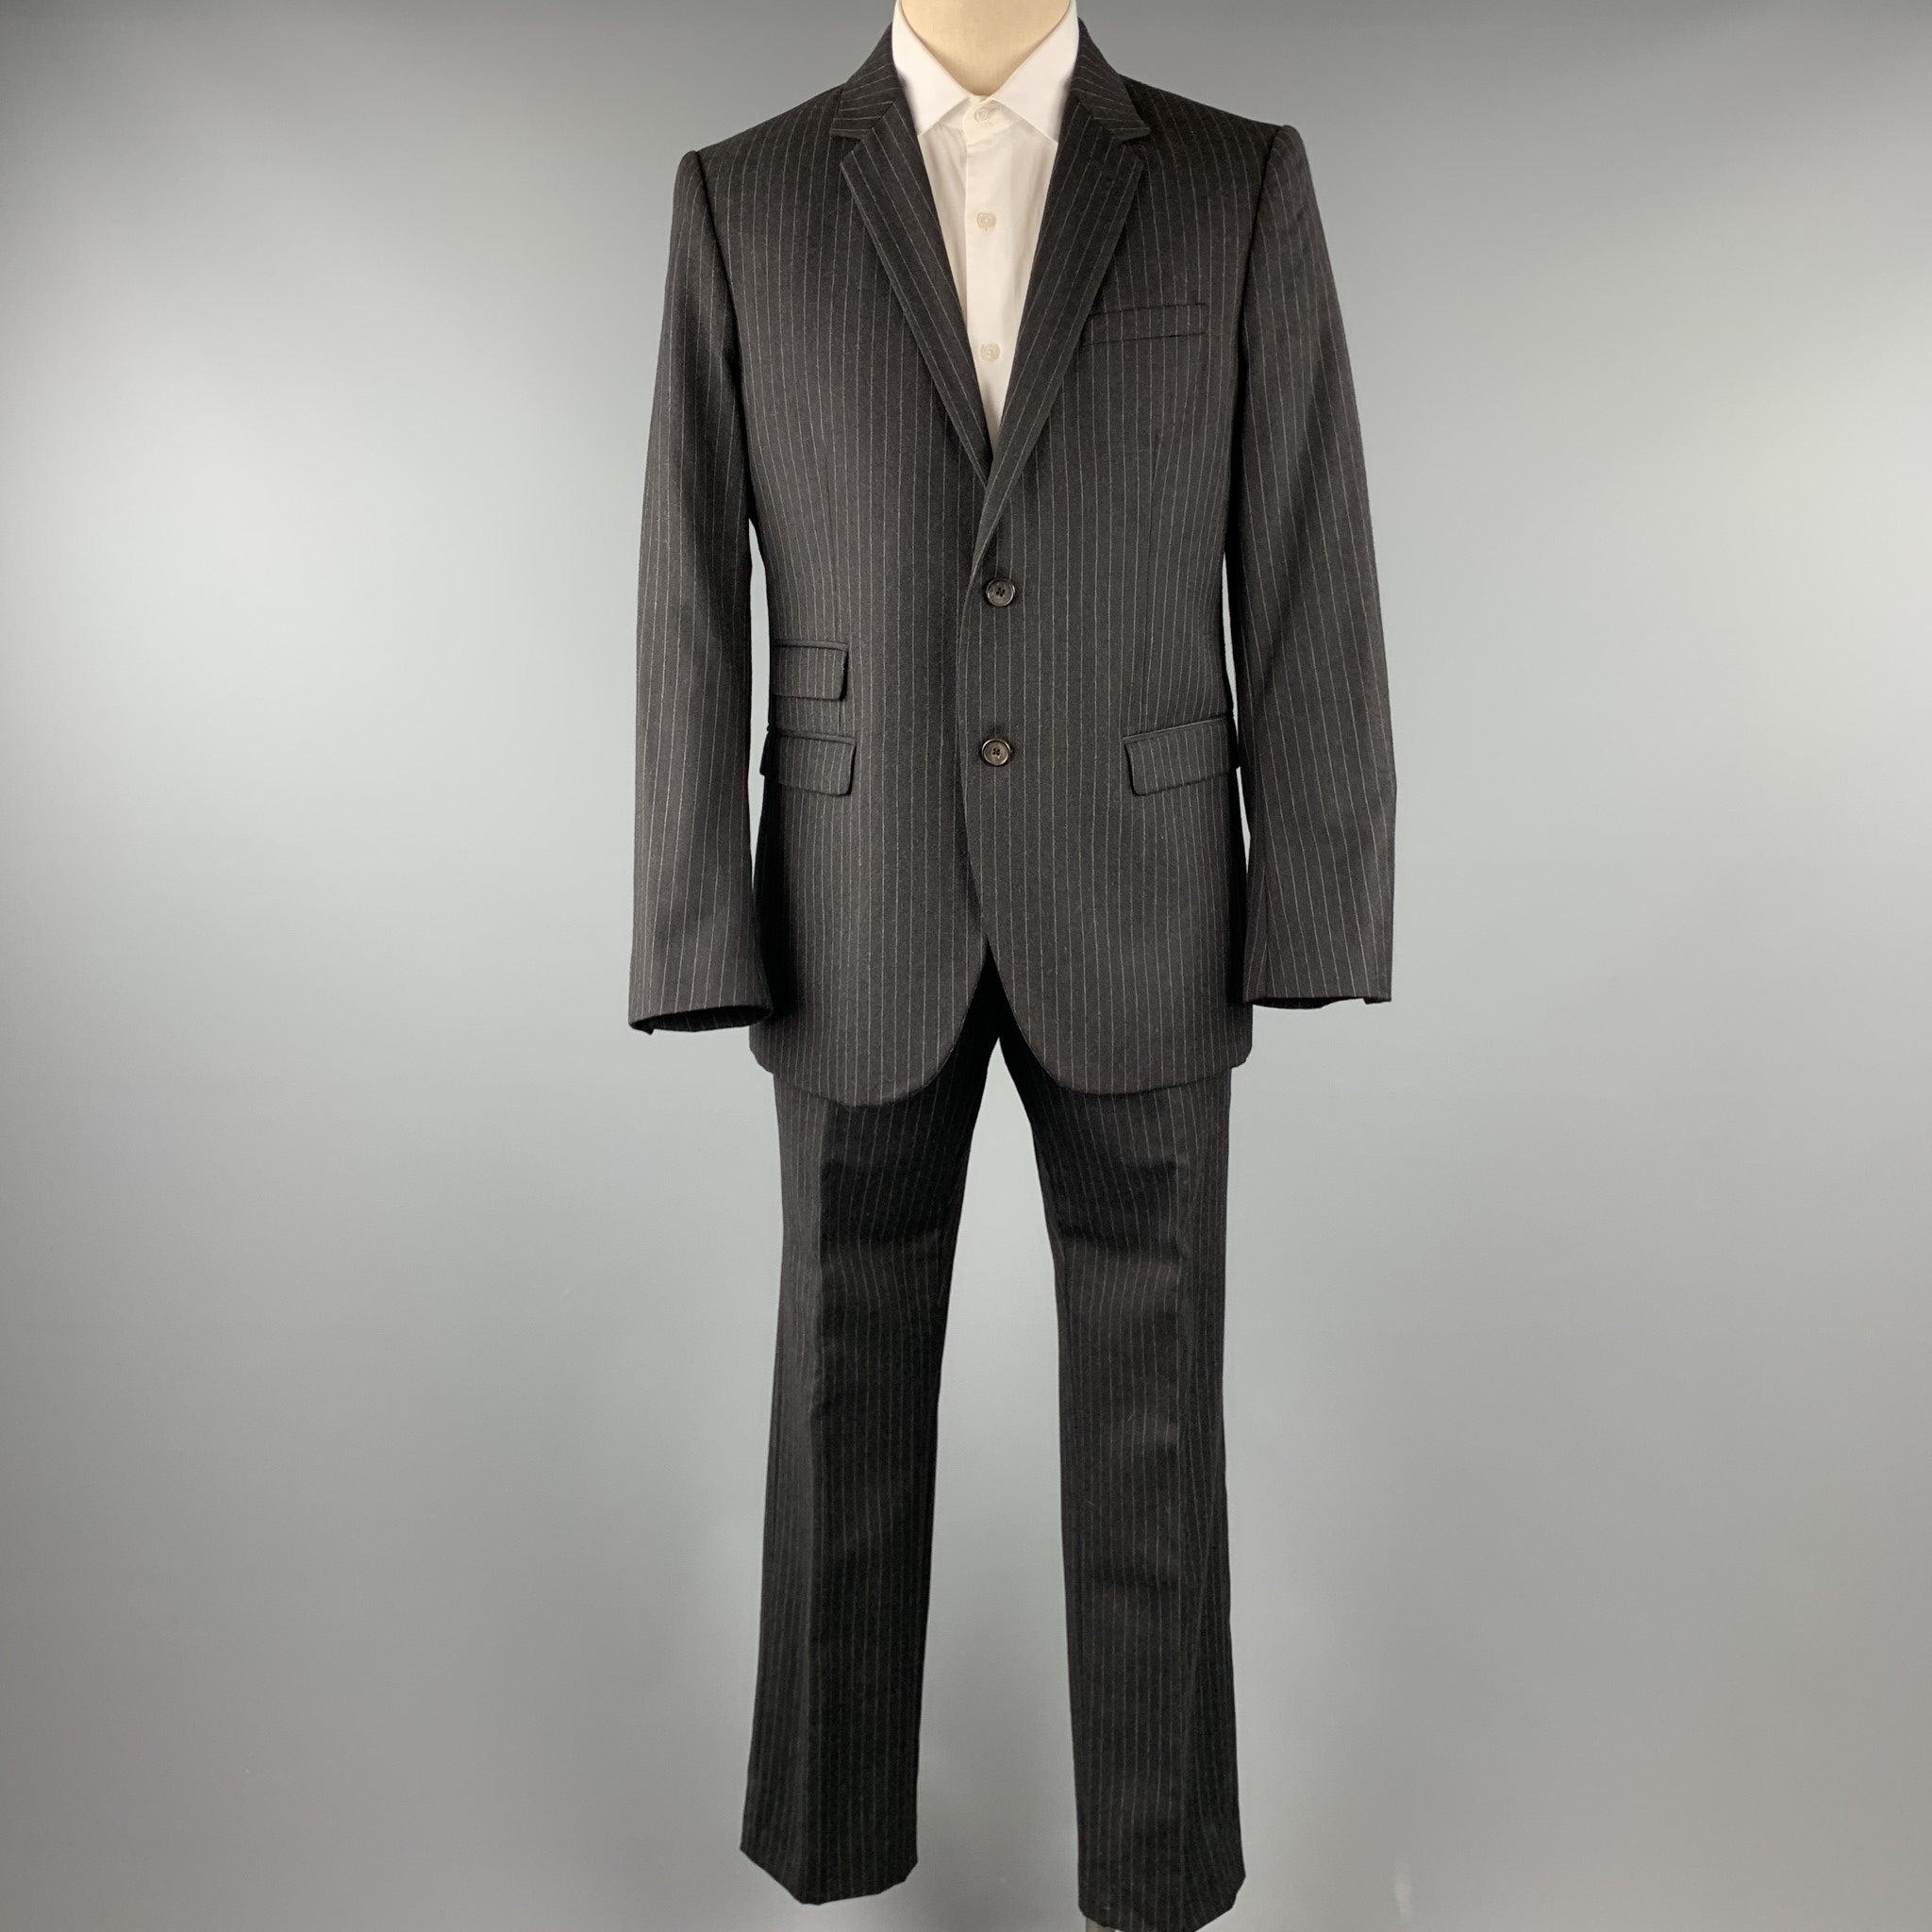 NEIL BARRETT
suit comes in a charcoal stripe wool and includes a single breasted, two button sport coat with a notch lapel and matching flat front trousers.
Excellent Pre-Owned Condition. 

Marked:   L 

Measurements: 
  -JacketShoulder: 17.5 inches